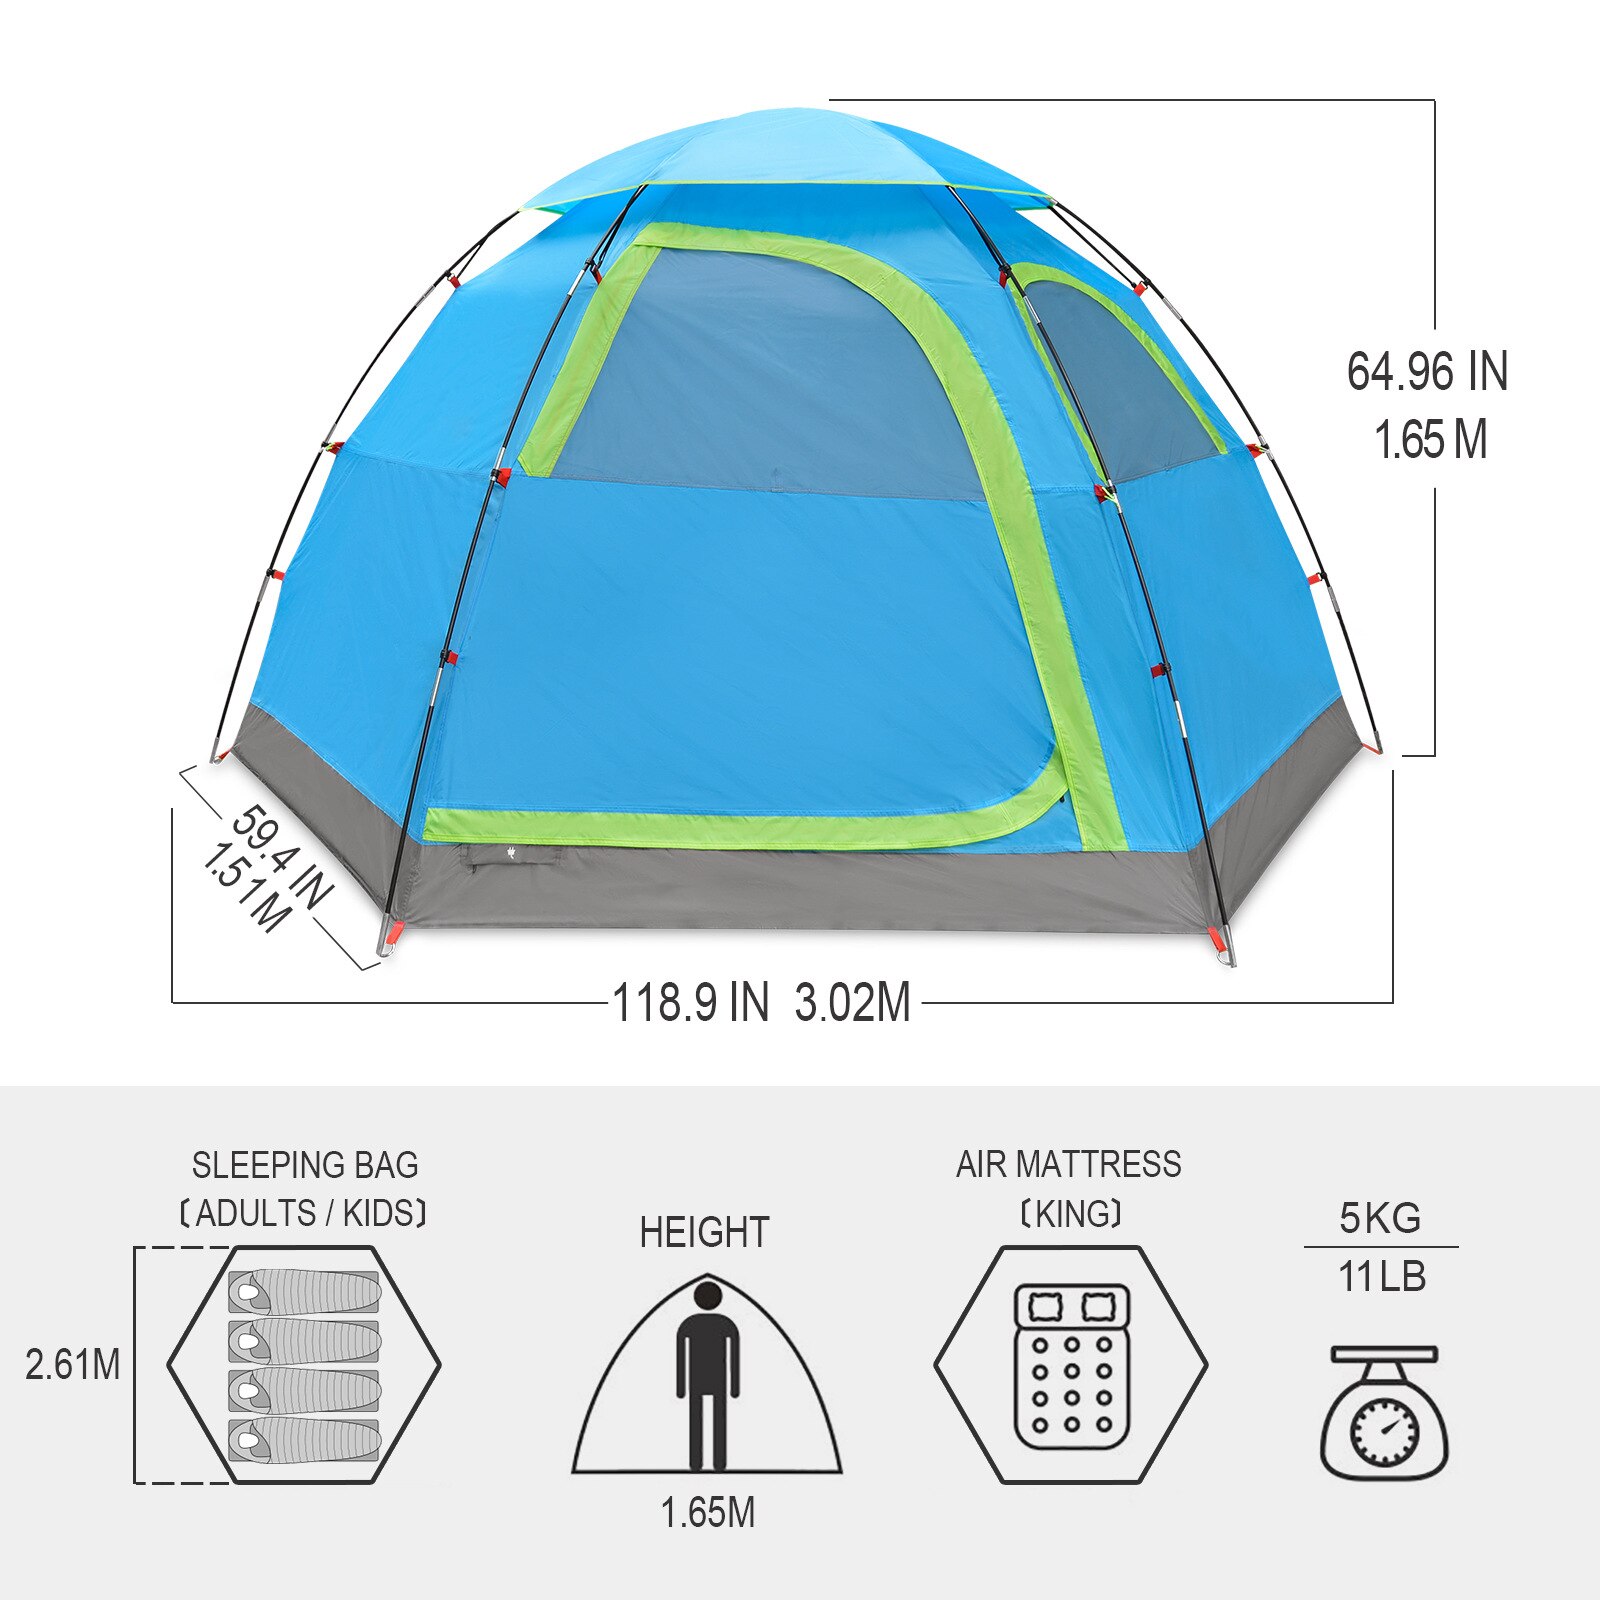 Cheap Goat Tents 4 Person Hexagonal Tent Outdoor Camping Single Layer Awning Mountaineering Convenient Foldable Tent Travel Equipment